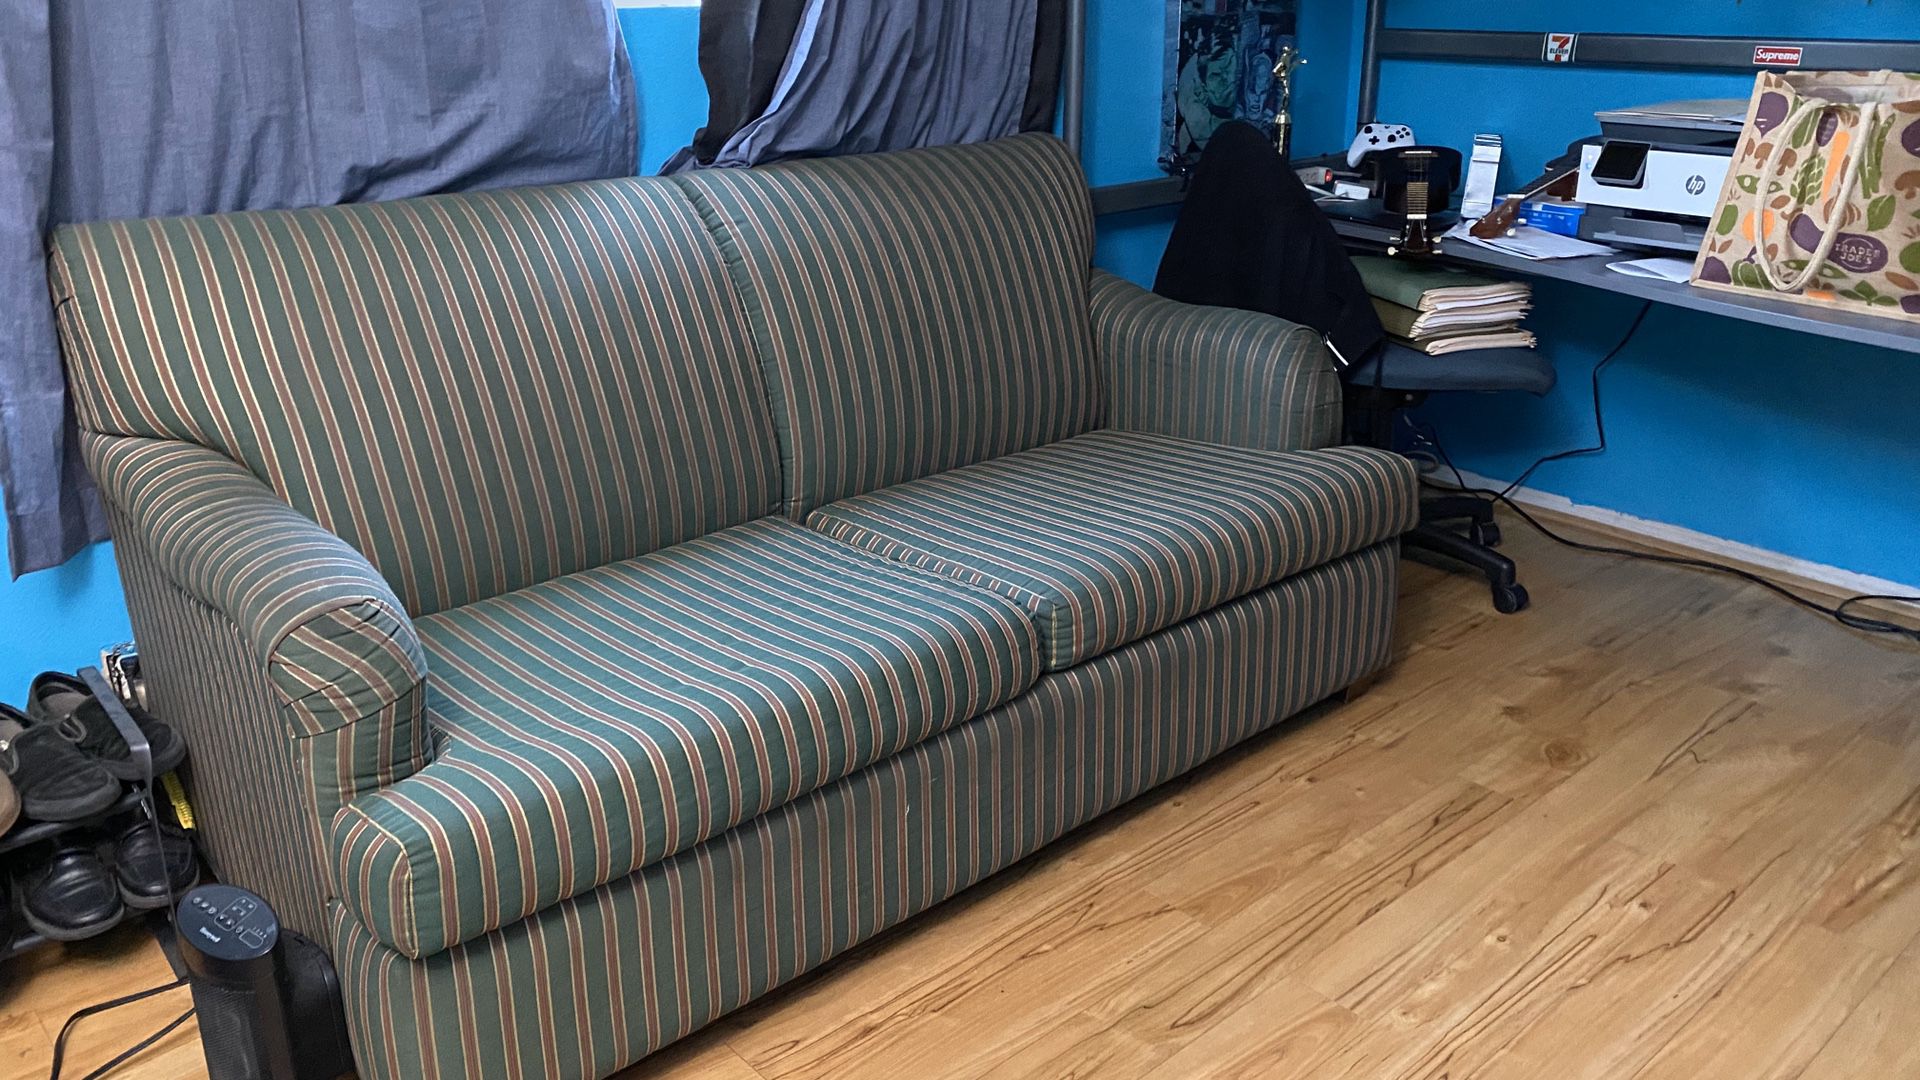 Sofa bed in perfect condition for $60